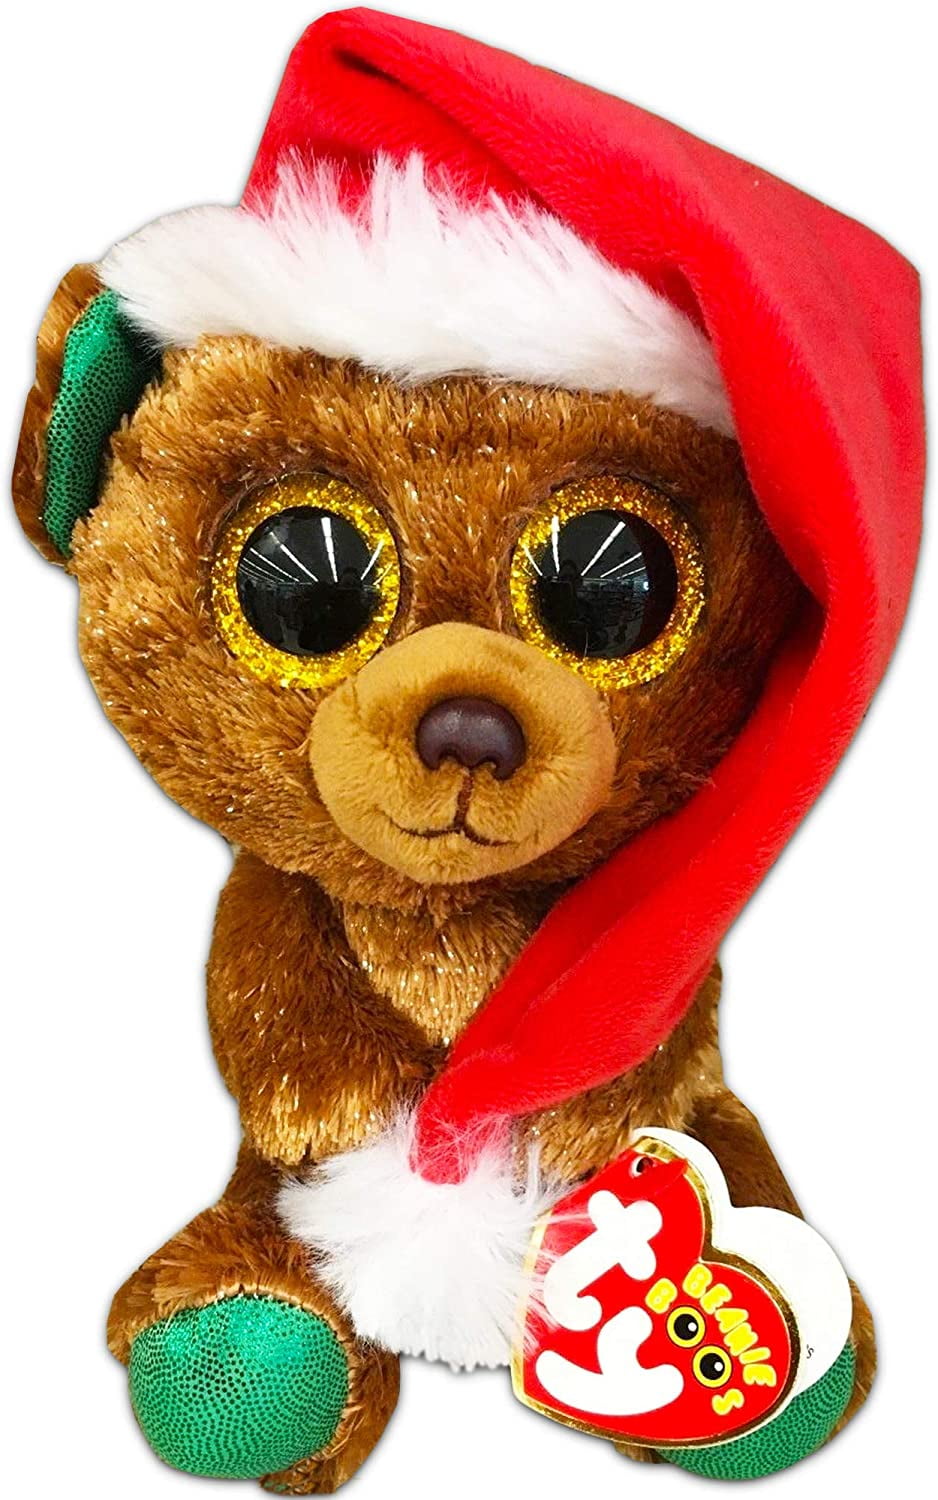 Ty Beanie Boos Key Clip ~ PANDY CLAUS Bear 2019 NEW Claire's Exclusive 4 Inch 